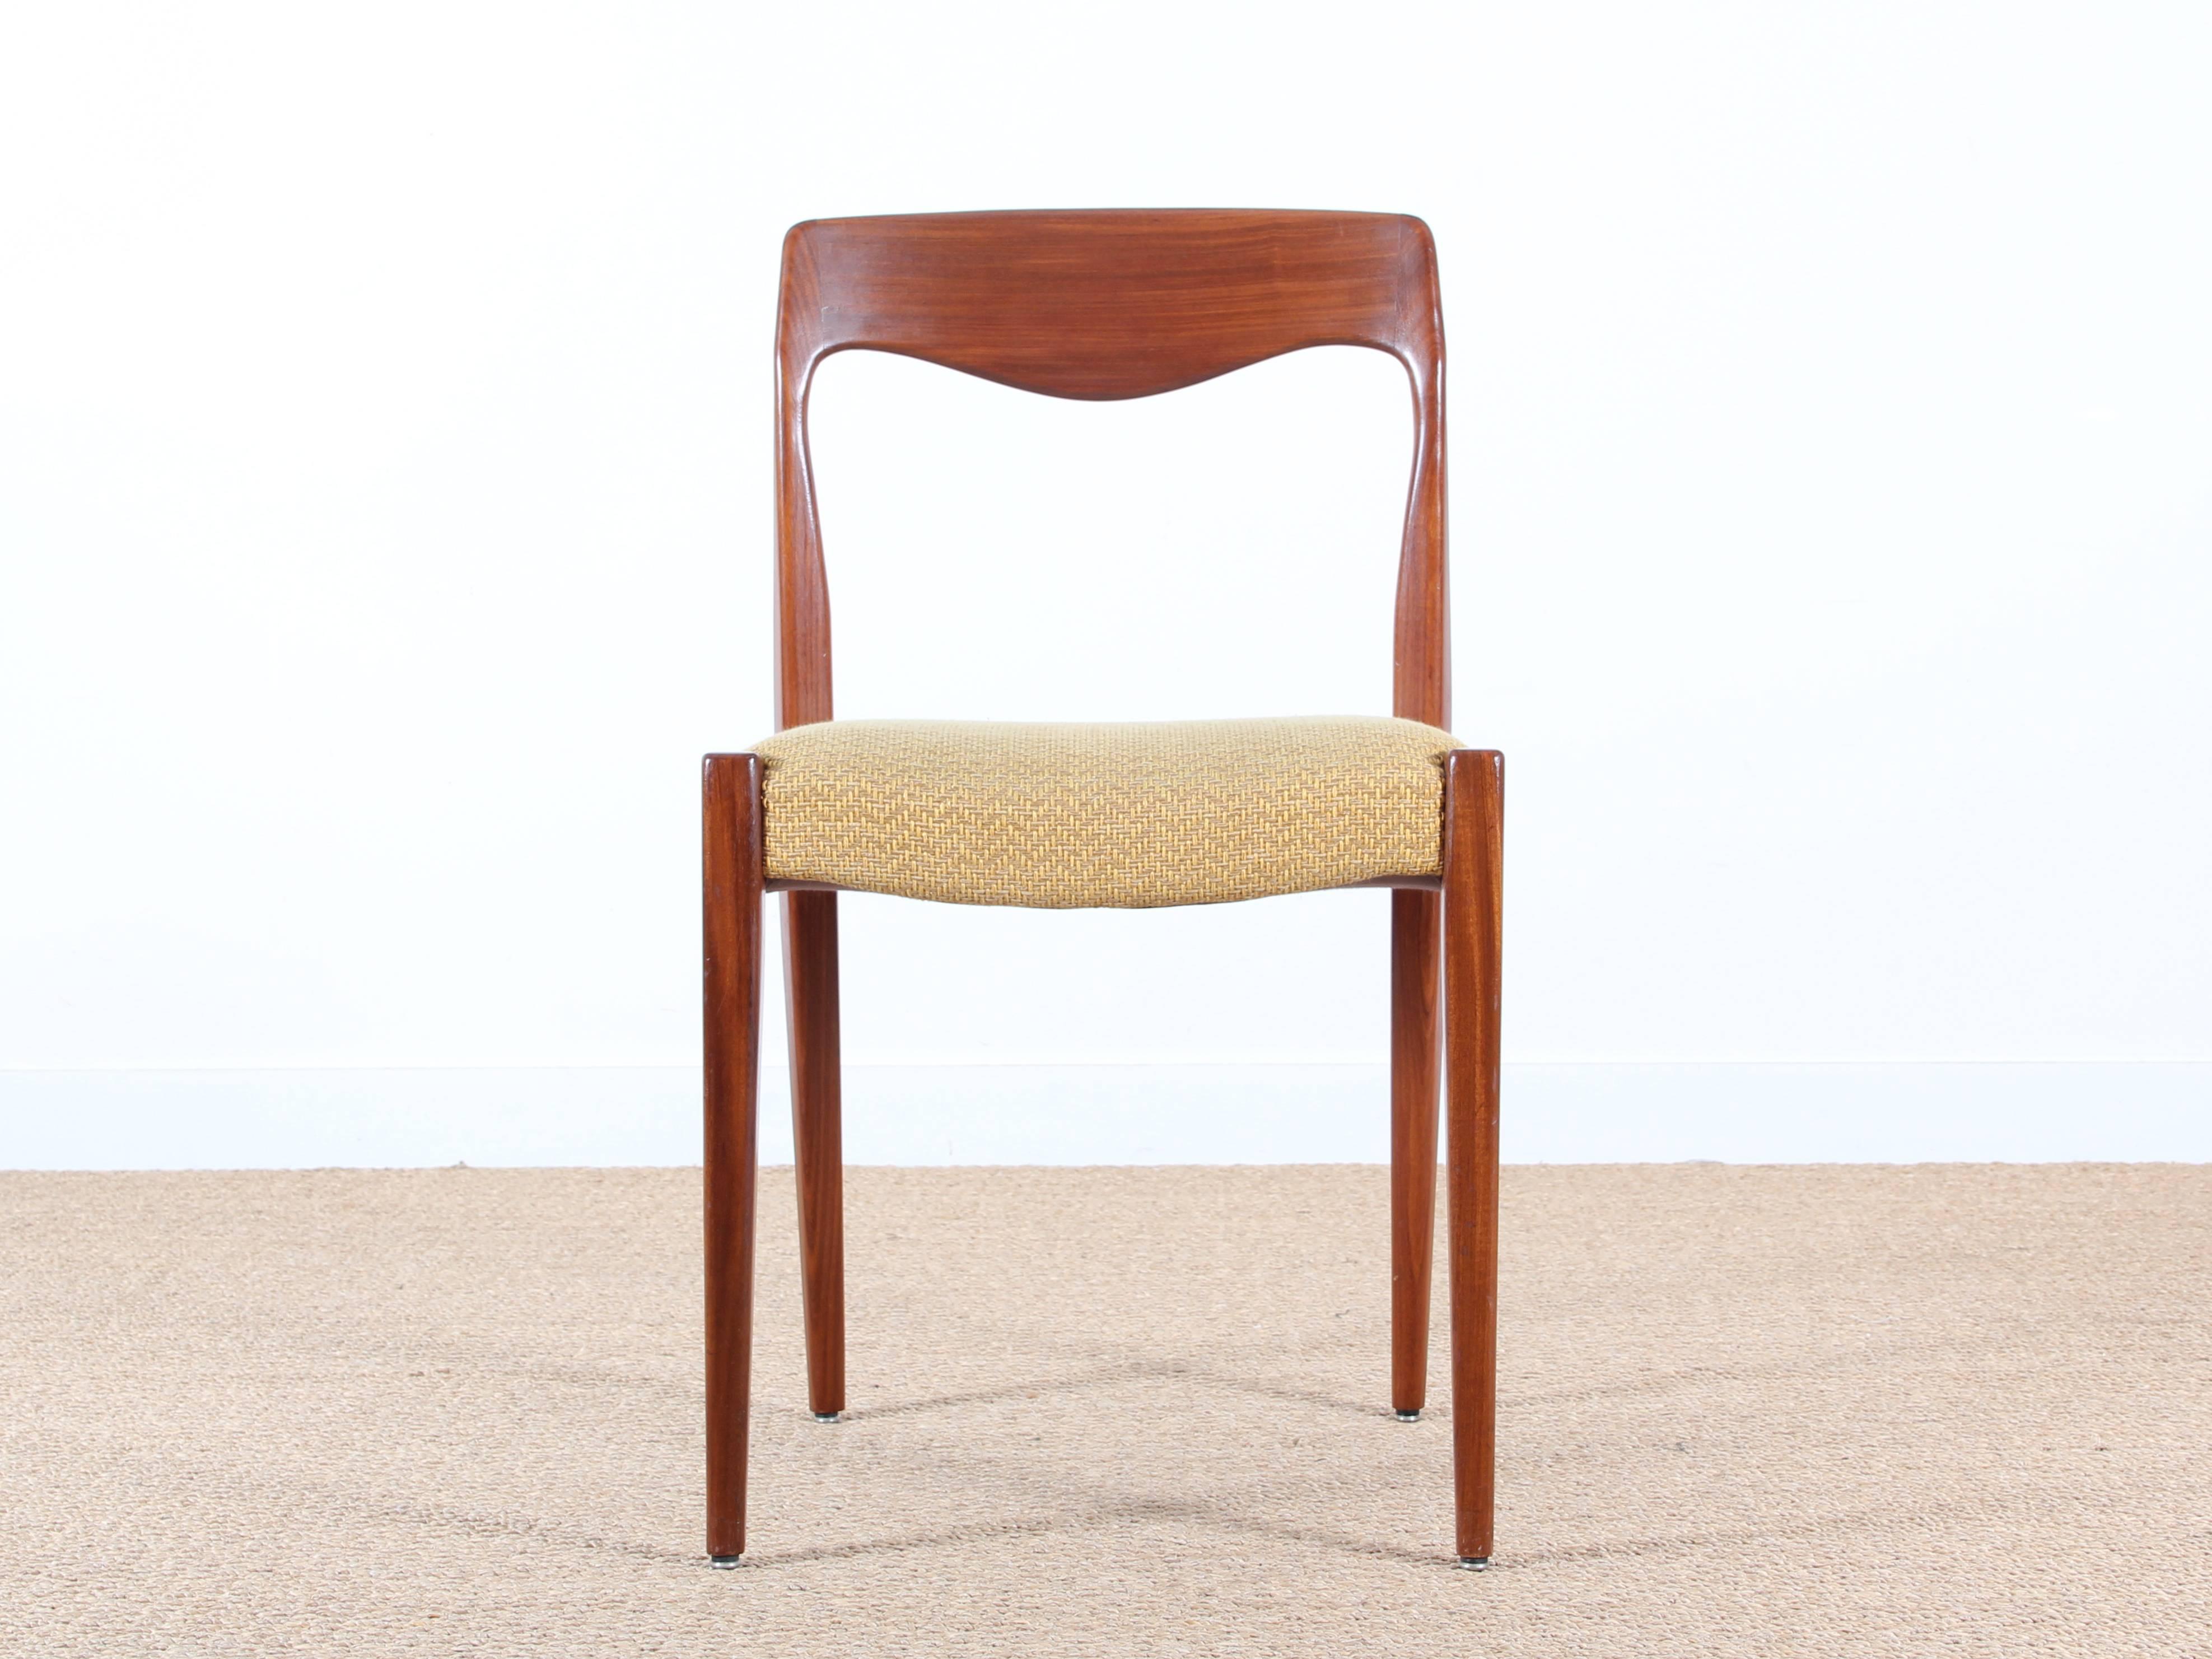 Set of four Scandinavian chairs in teak, fabric covered Pierre Frey, pattern straw. Trim and fabric redone.